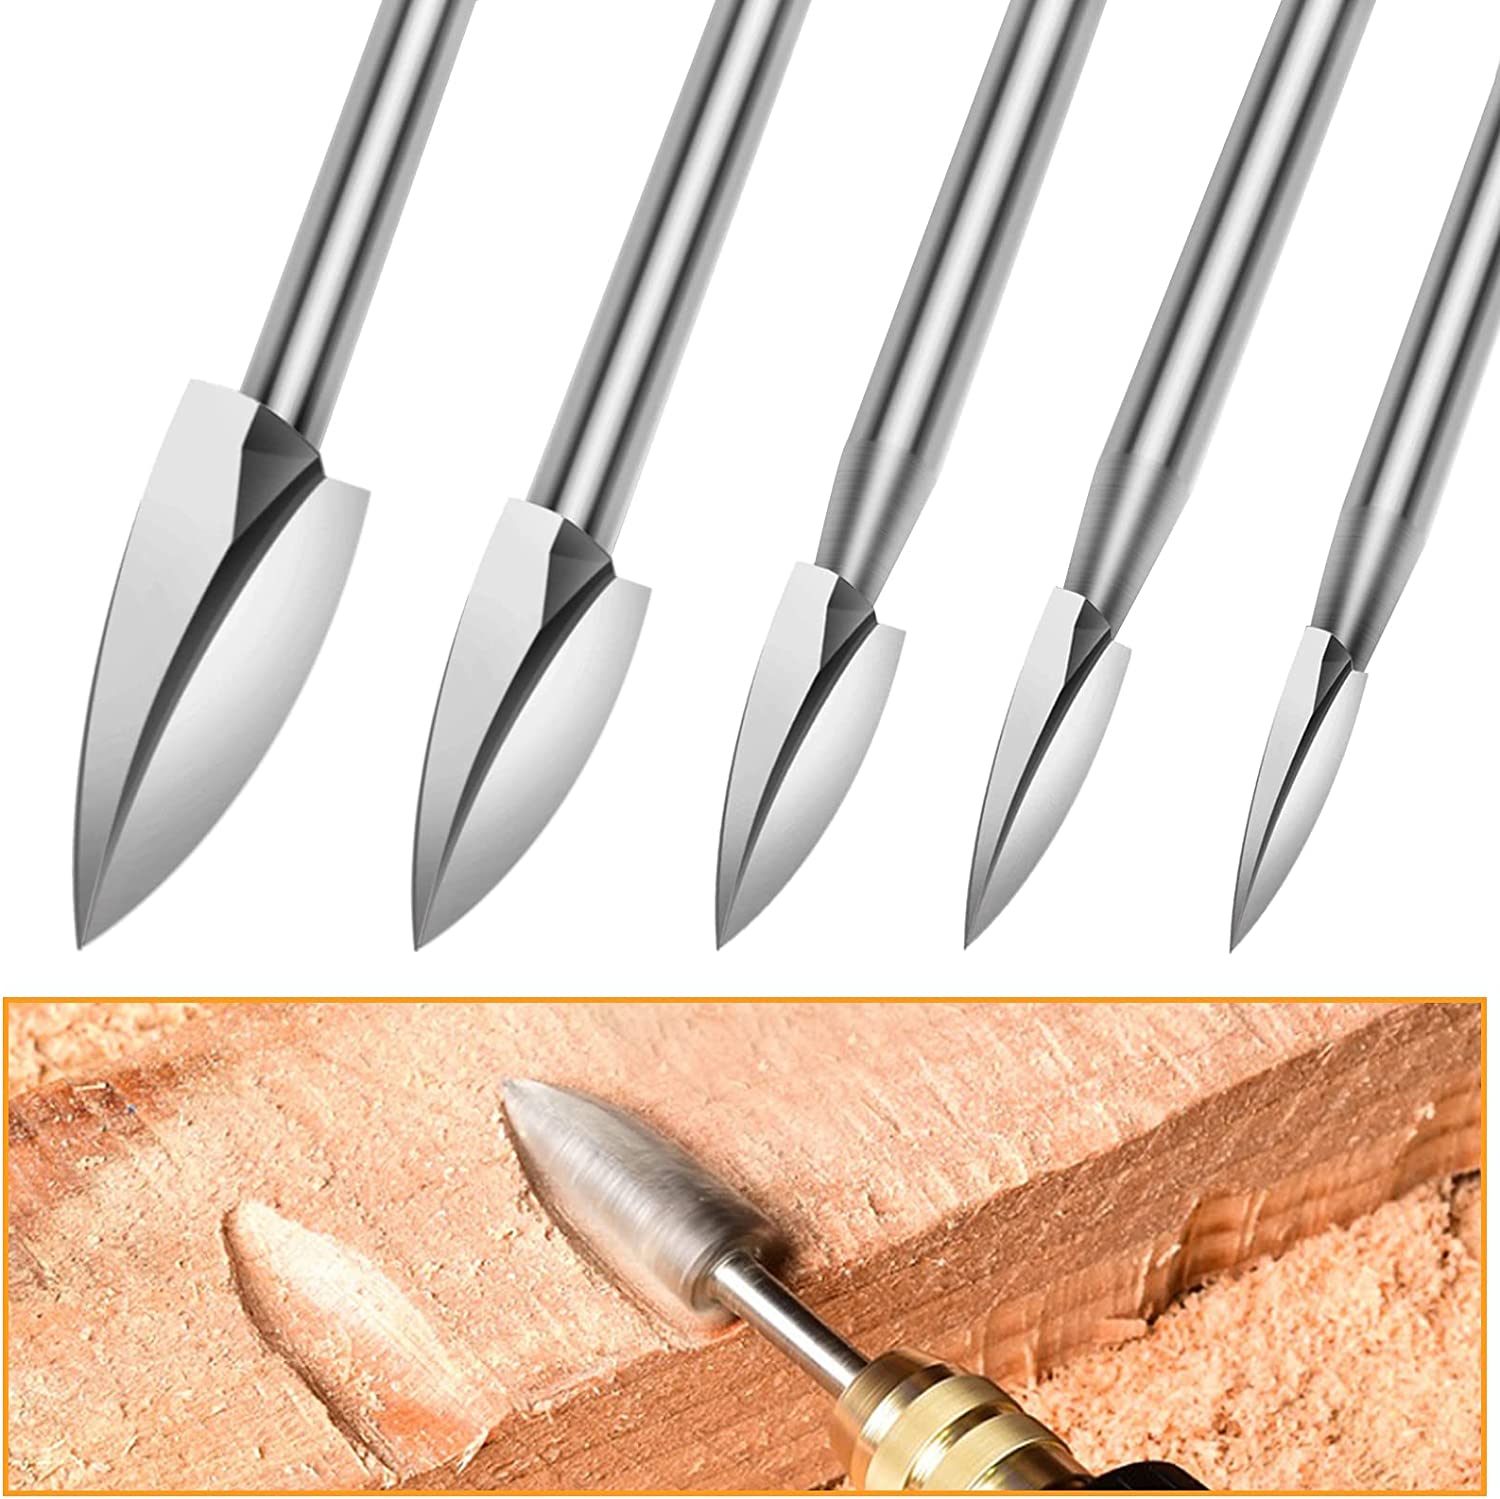  Wood Carving Tools, 5 PCS HSS Woodworking Tools for Rotary Tool,  Engraving Drill Bit Set 1/8” Shank Universal Tool for DIY Carving Drilling  Micro Sculpture Wood Crafts Grinding : Arts, Crafts